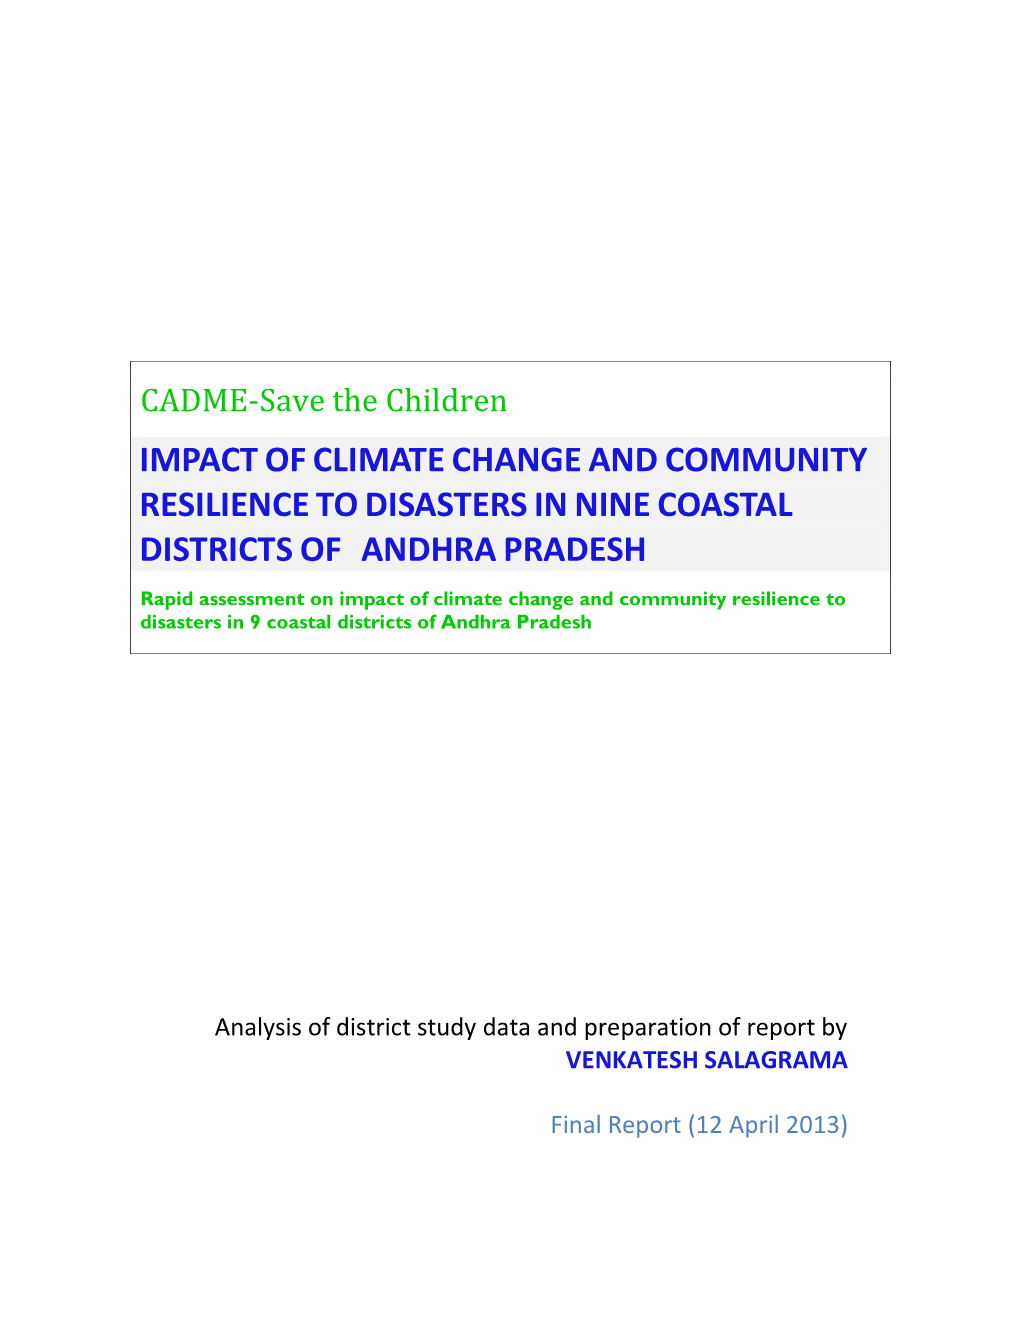 Impact of Climate Change and Community Resilience To